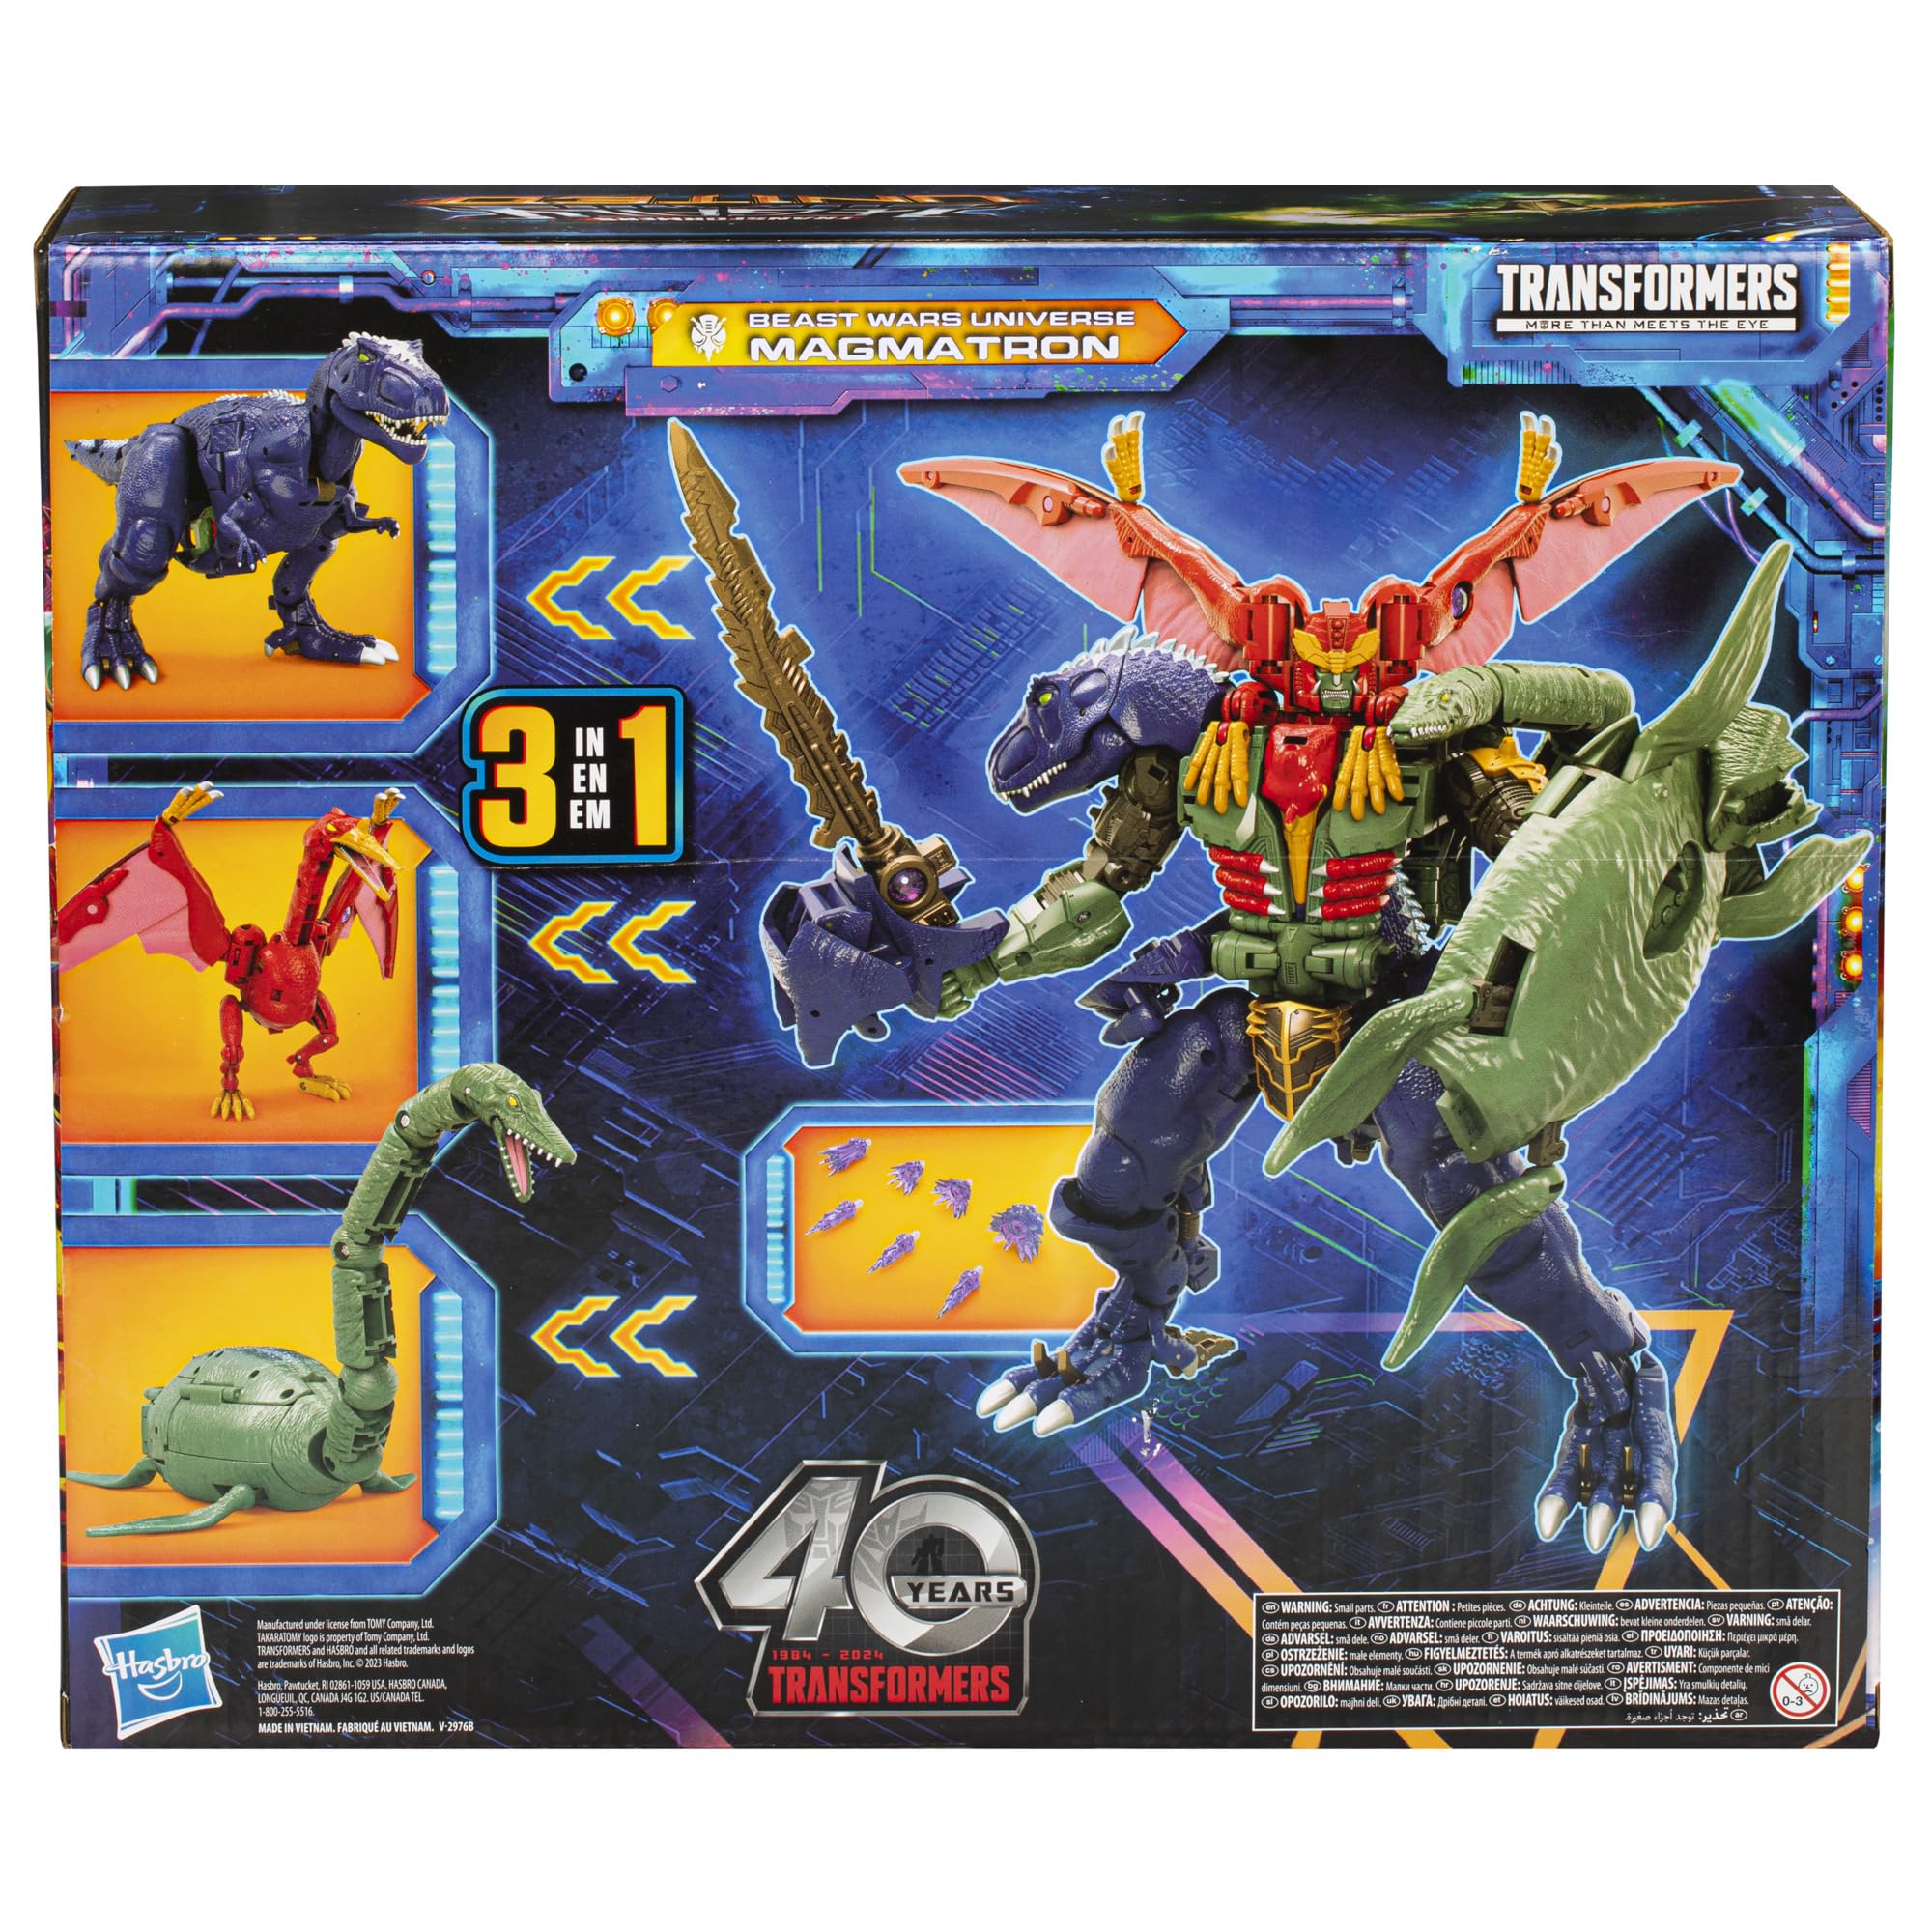 Transformers Legacy United Commander Class Beast Wars Universe Magmatron, 10-inch 3-in-1 Converting Action Figure, 8+